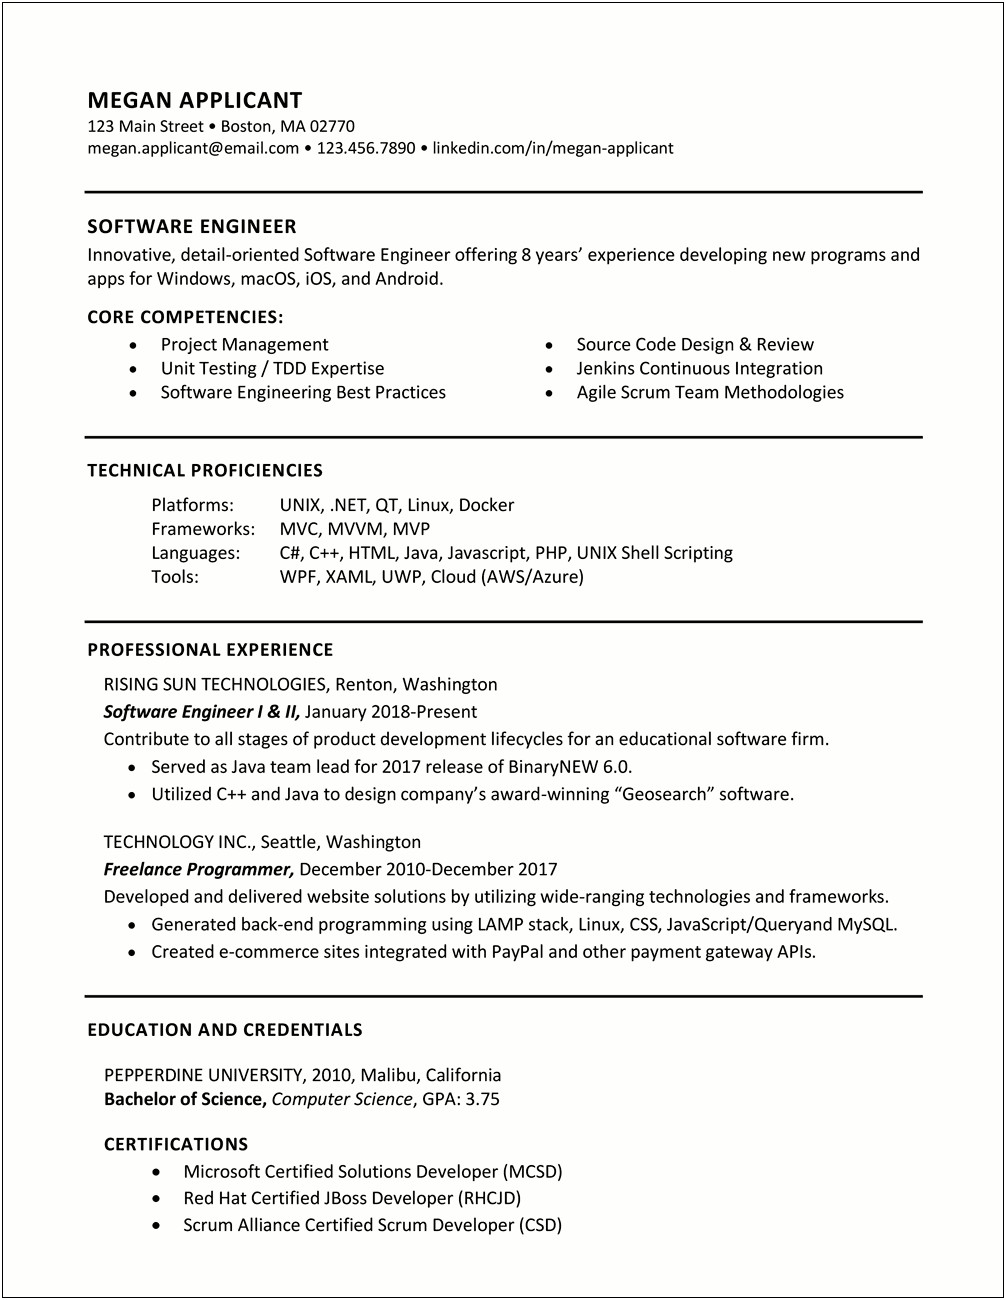 Resume Technical Skills Some Experience